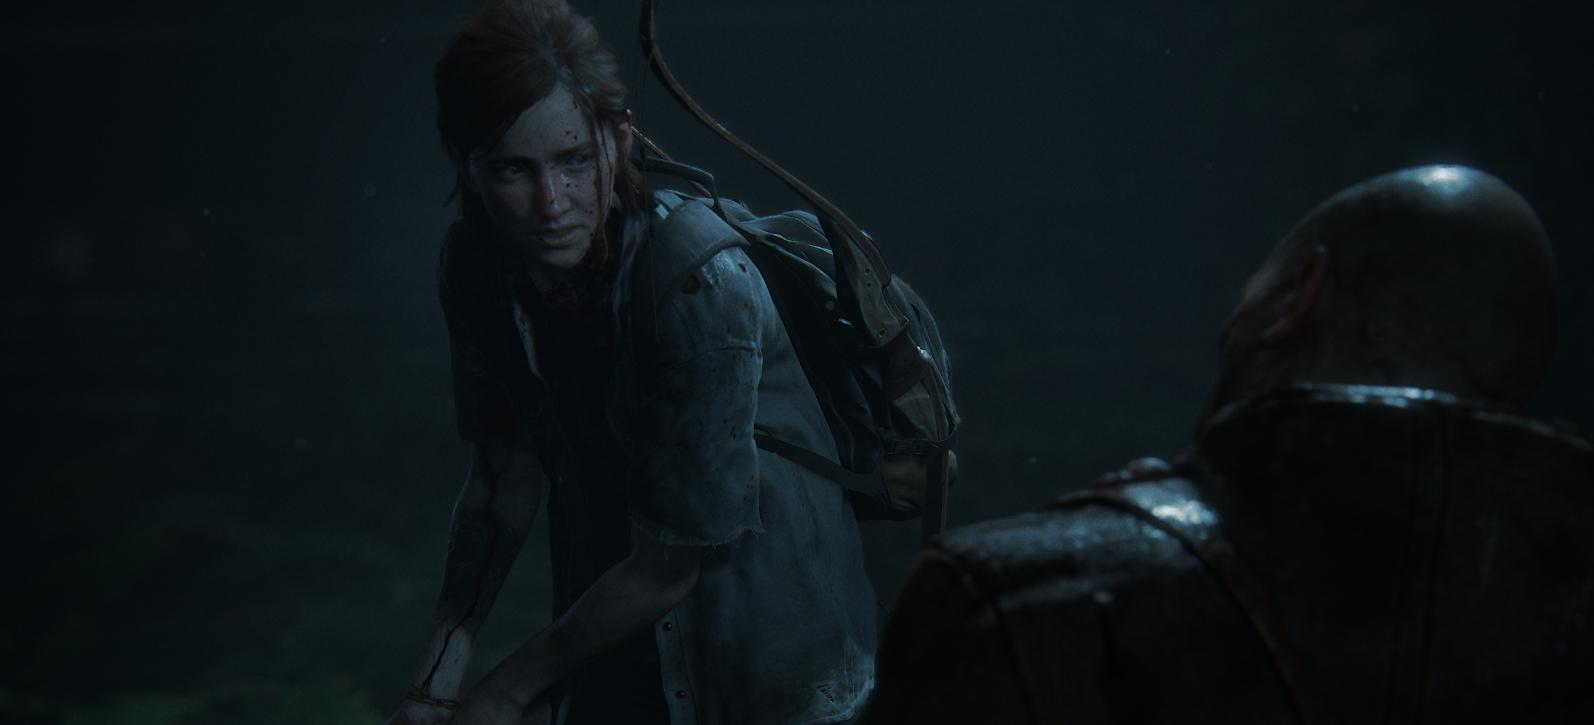 Job listing suggests Last of Us 2 will come to PC